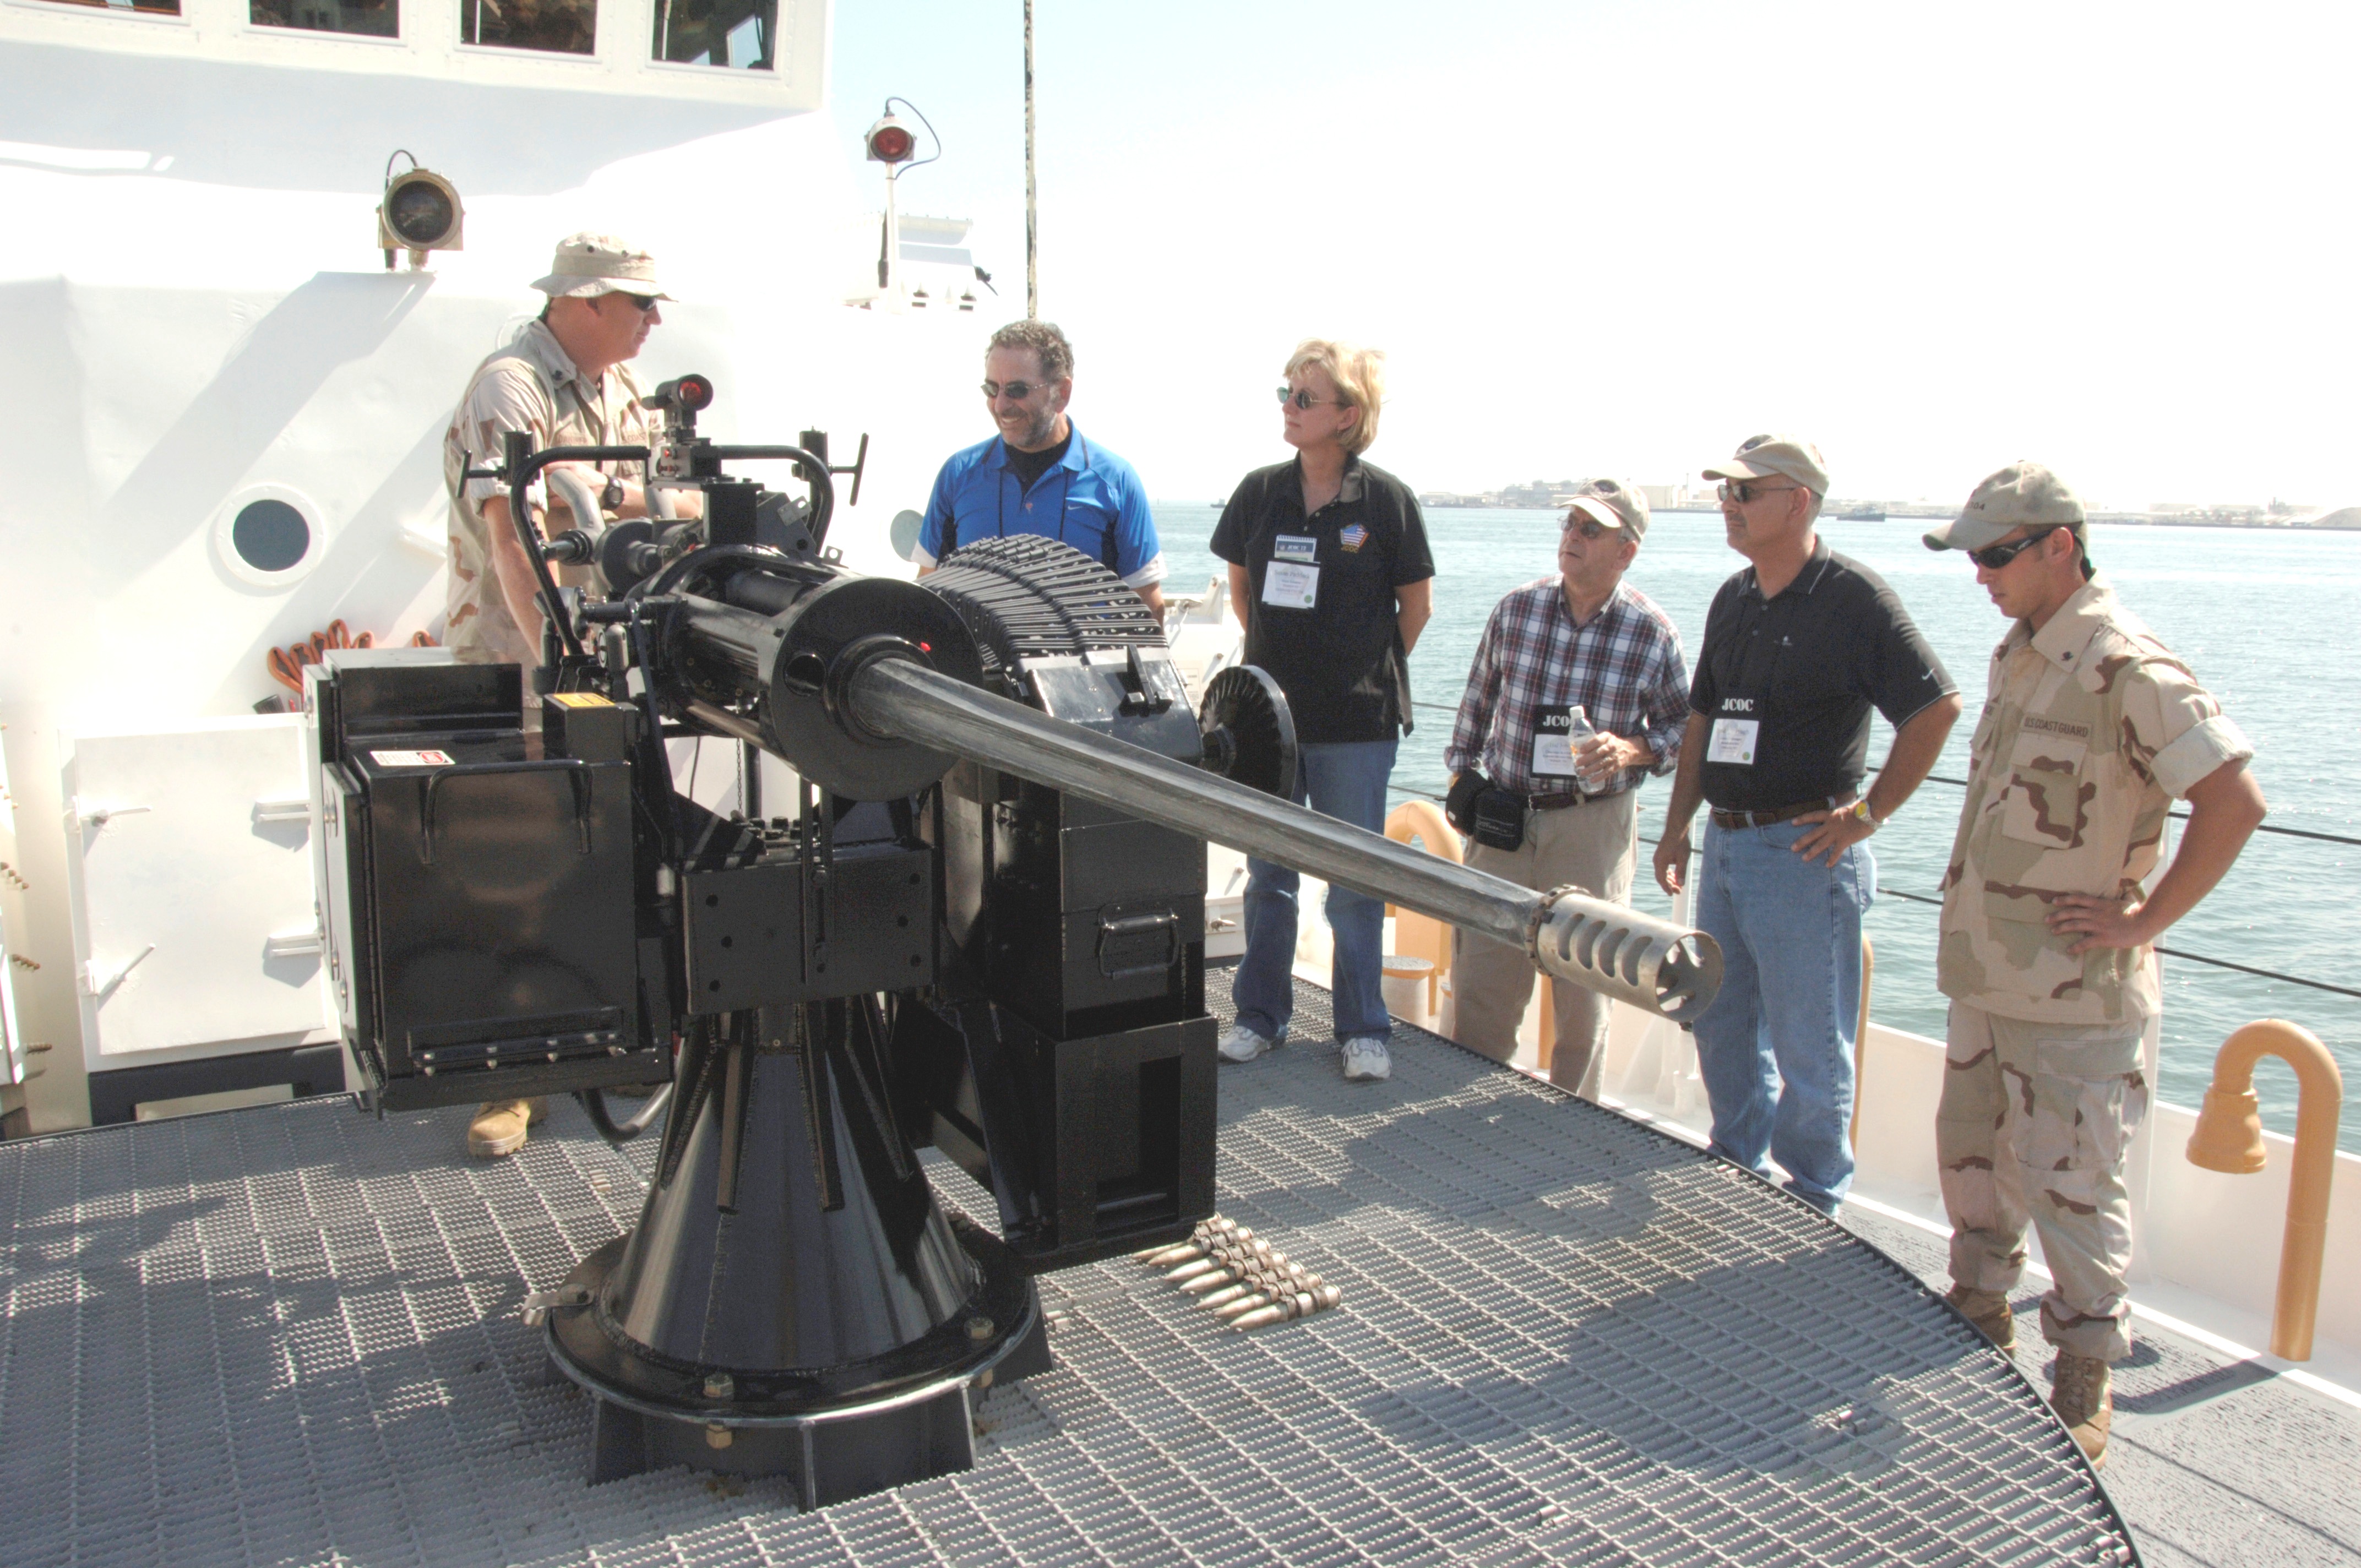 Joint Civilian Orientation Conference participants, including Sen. Susan Paddack (third from left) get a close look at the deck gun of a 110-foot Coast Guard patrol boat in Manama, Bahrain.   